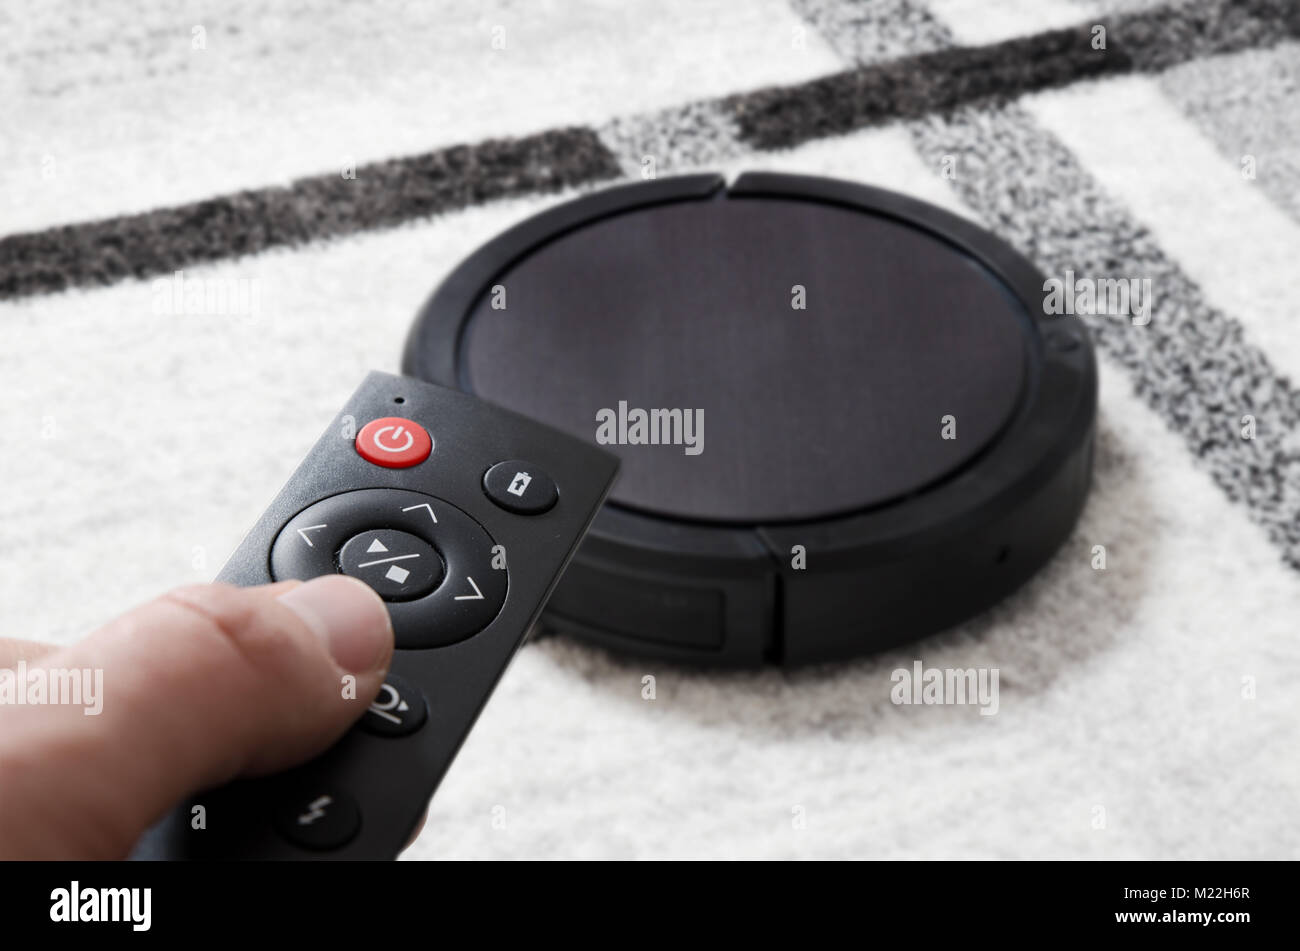 Robotic vacuum cleaner working on carpet. Hand holding remote control Stock Photo